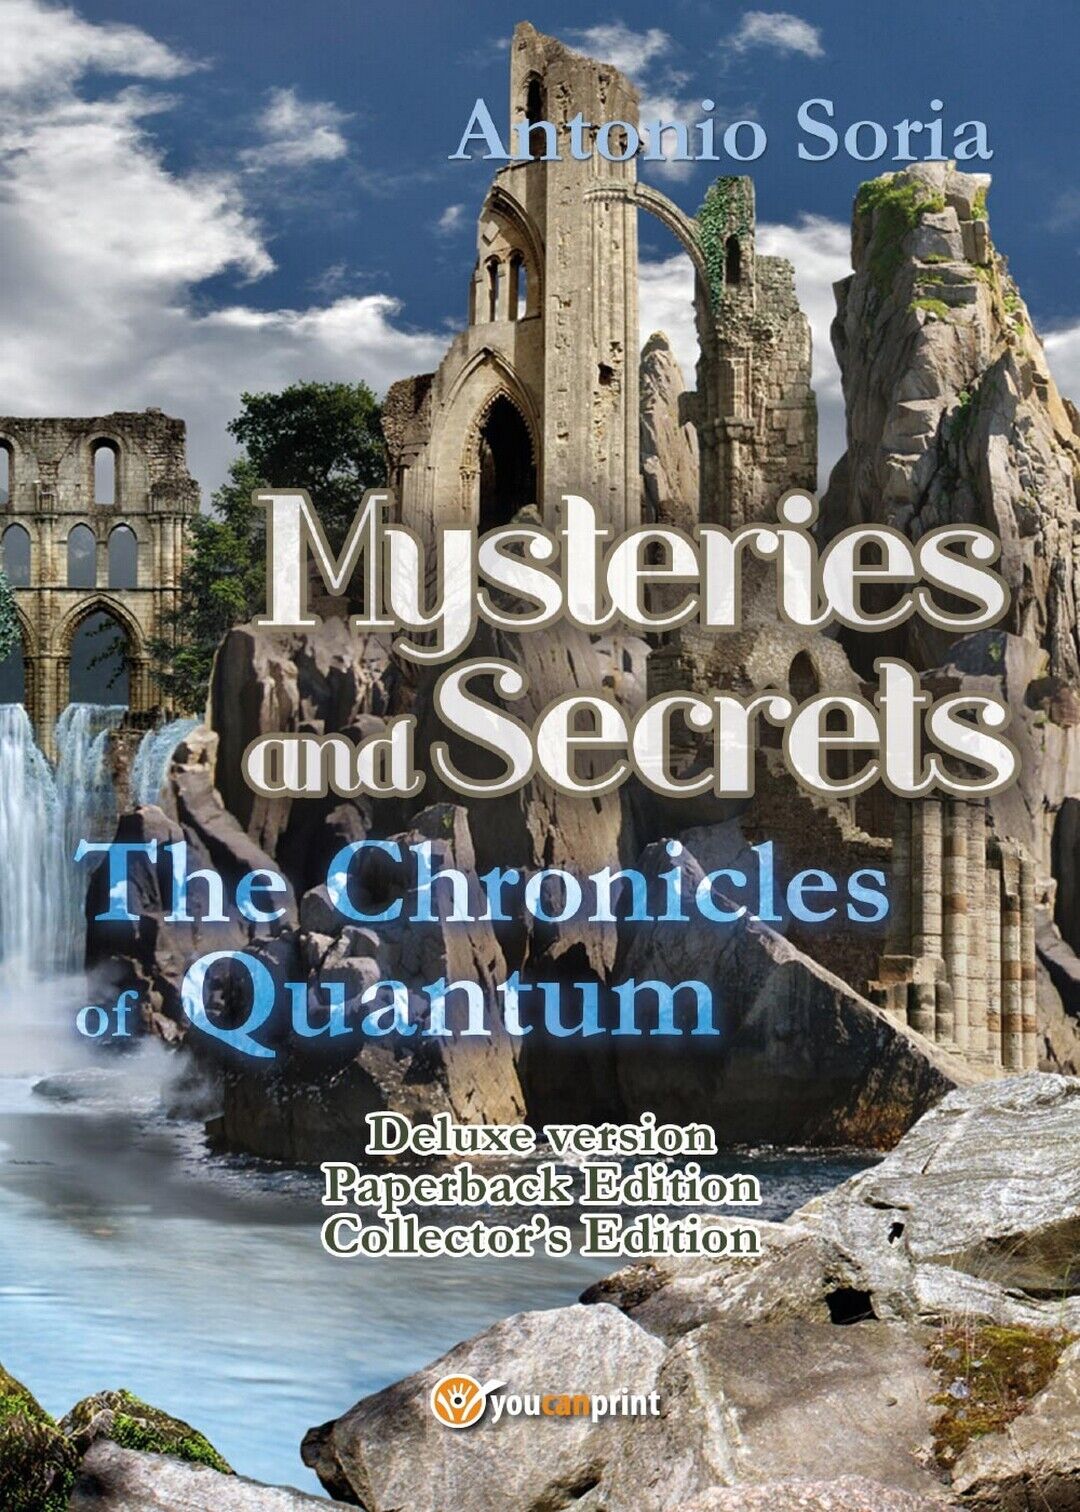 Mysteries and Secrets. The Chronicles of Quantum (Deluxe version) Paperback Edit libro usato